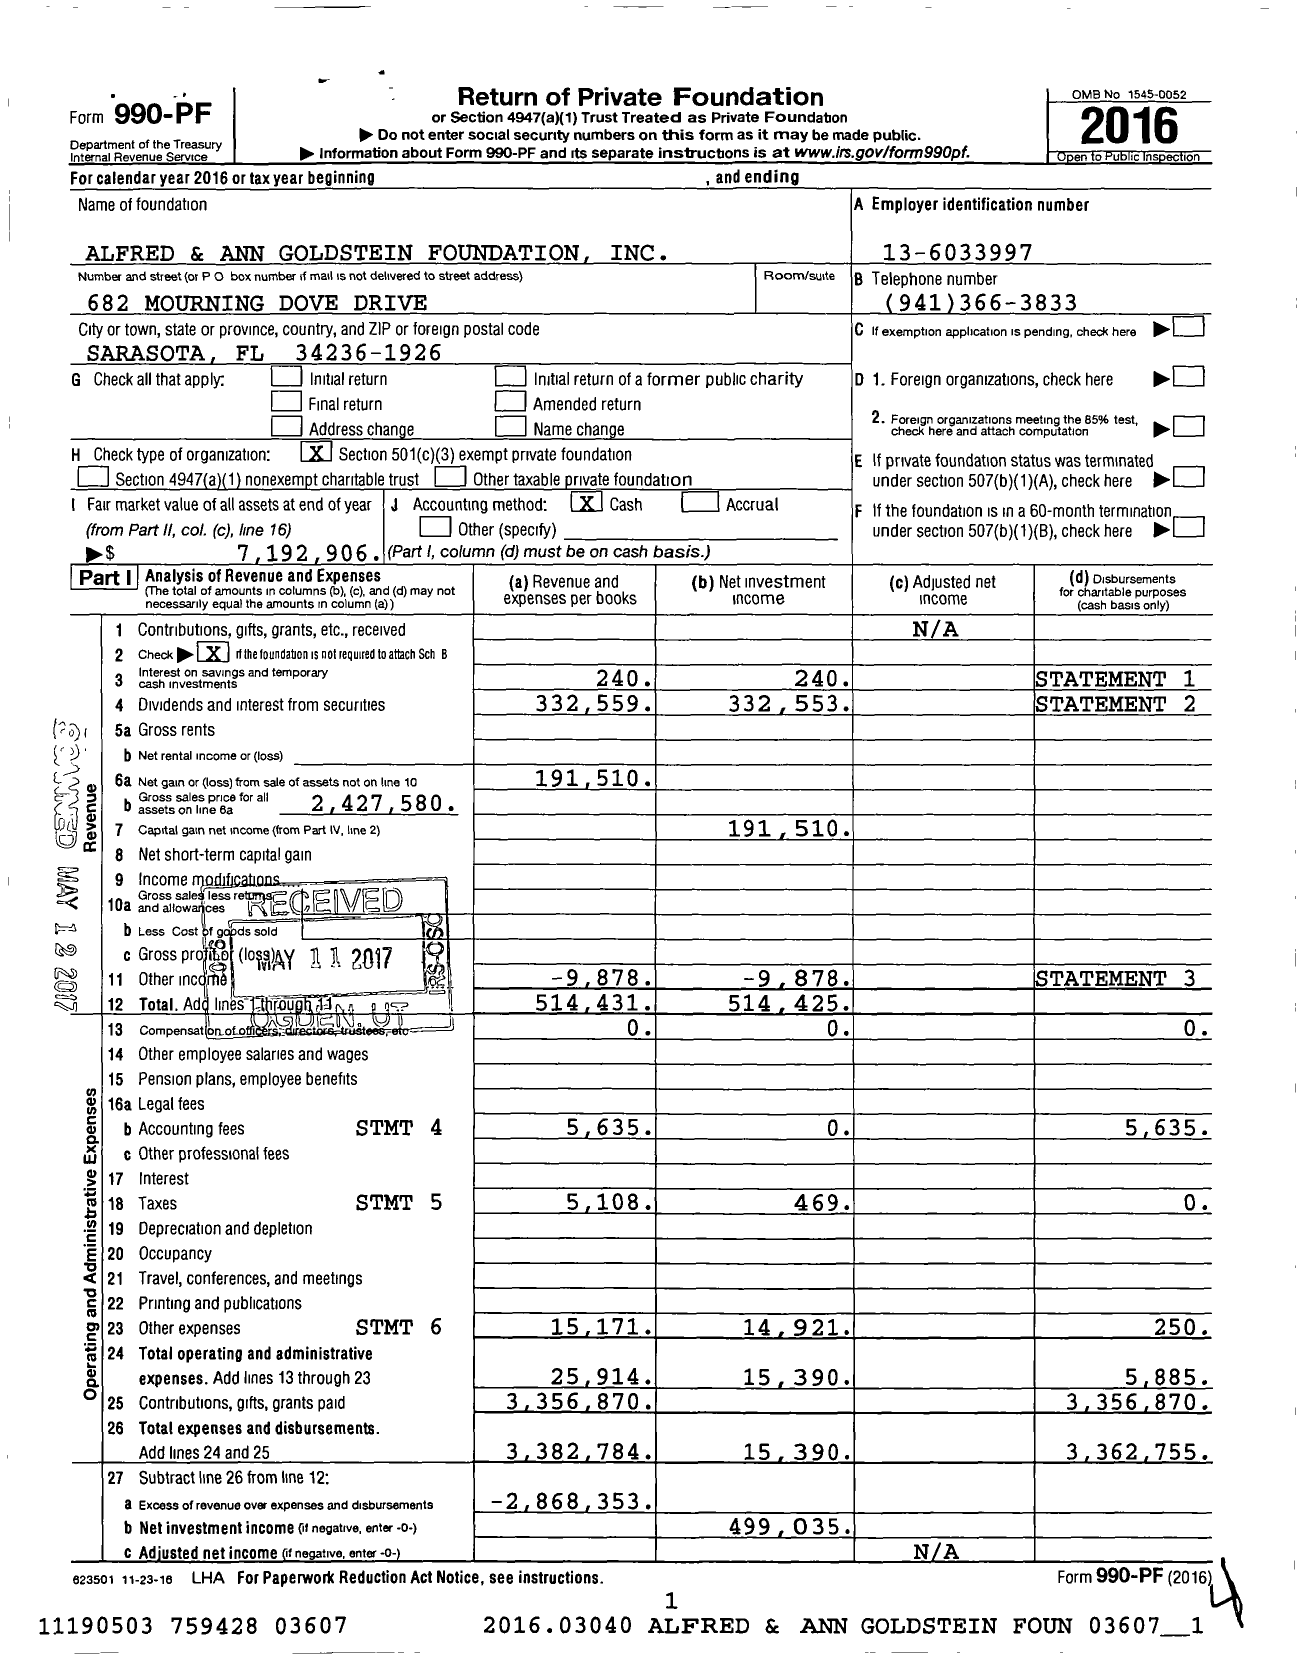 Image of first page of 2016 Form 990PF for Alfred and Ann Goldstein Foundation